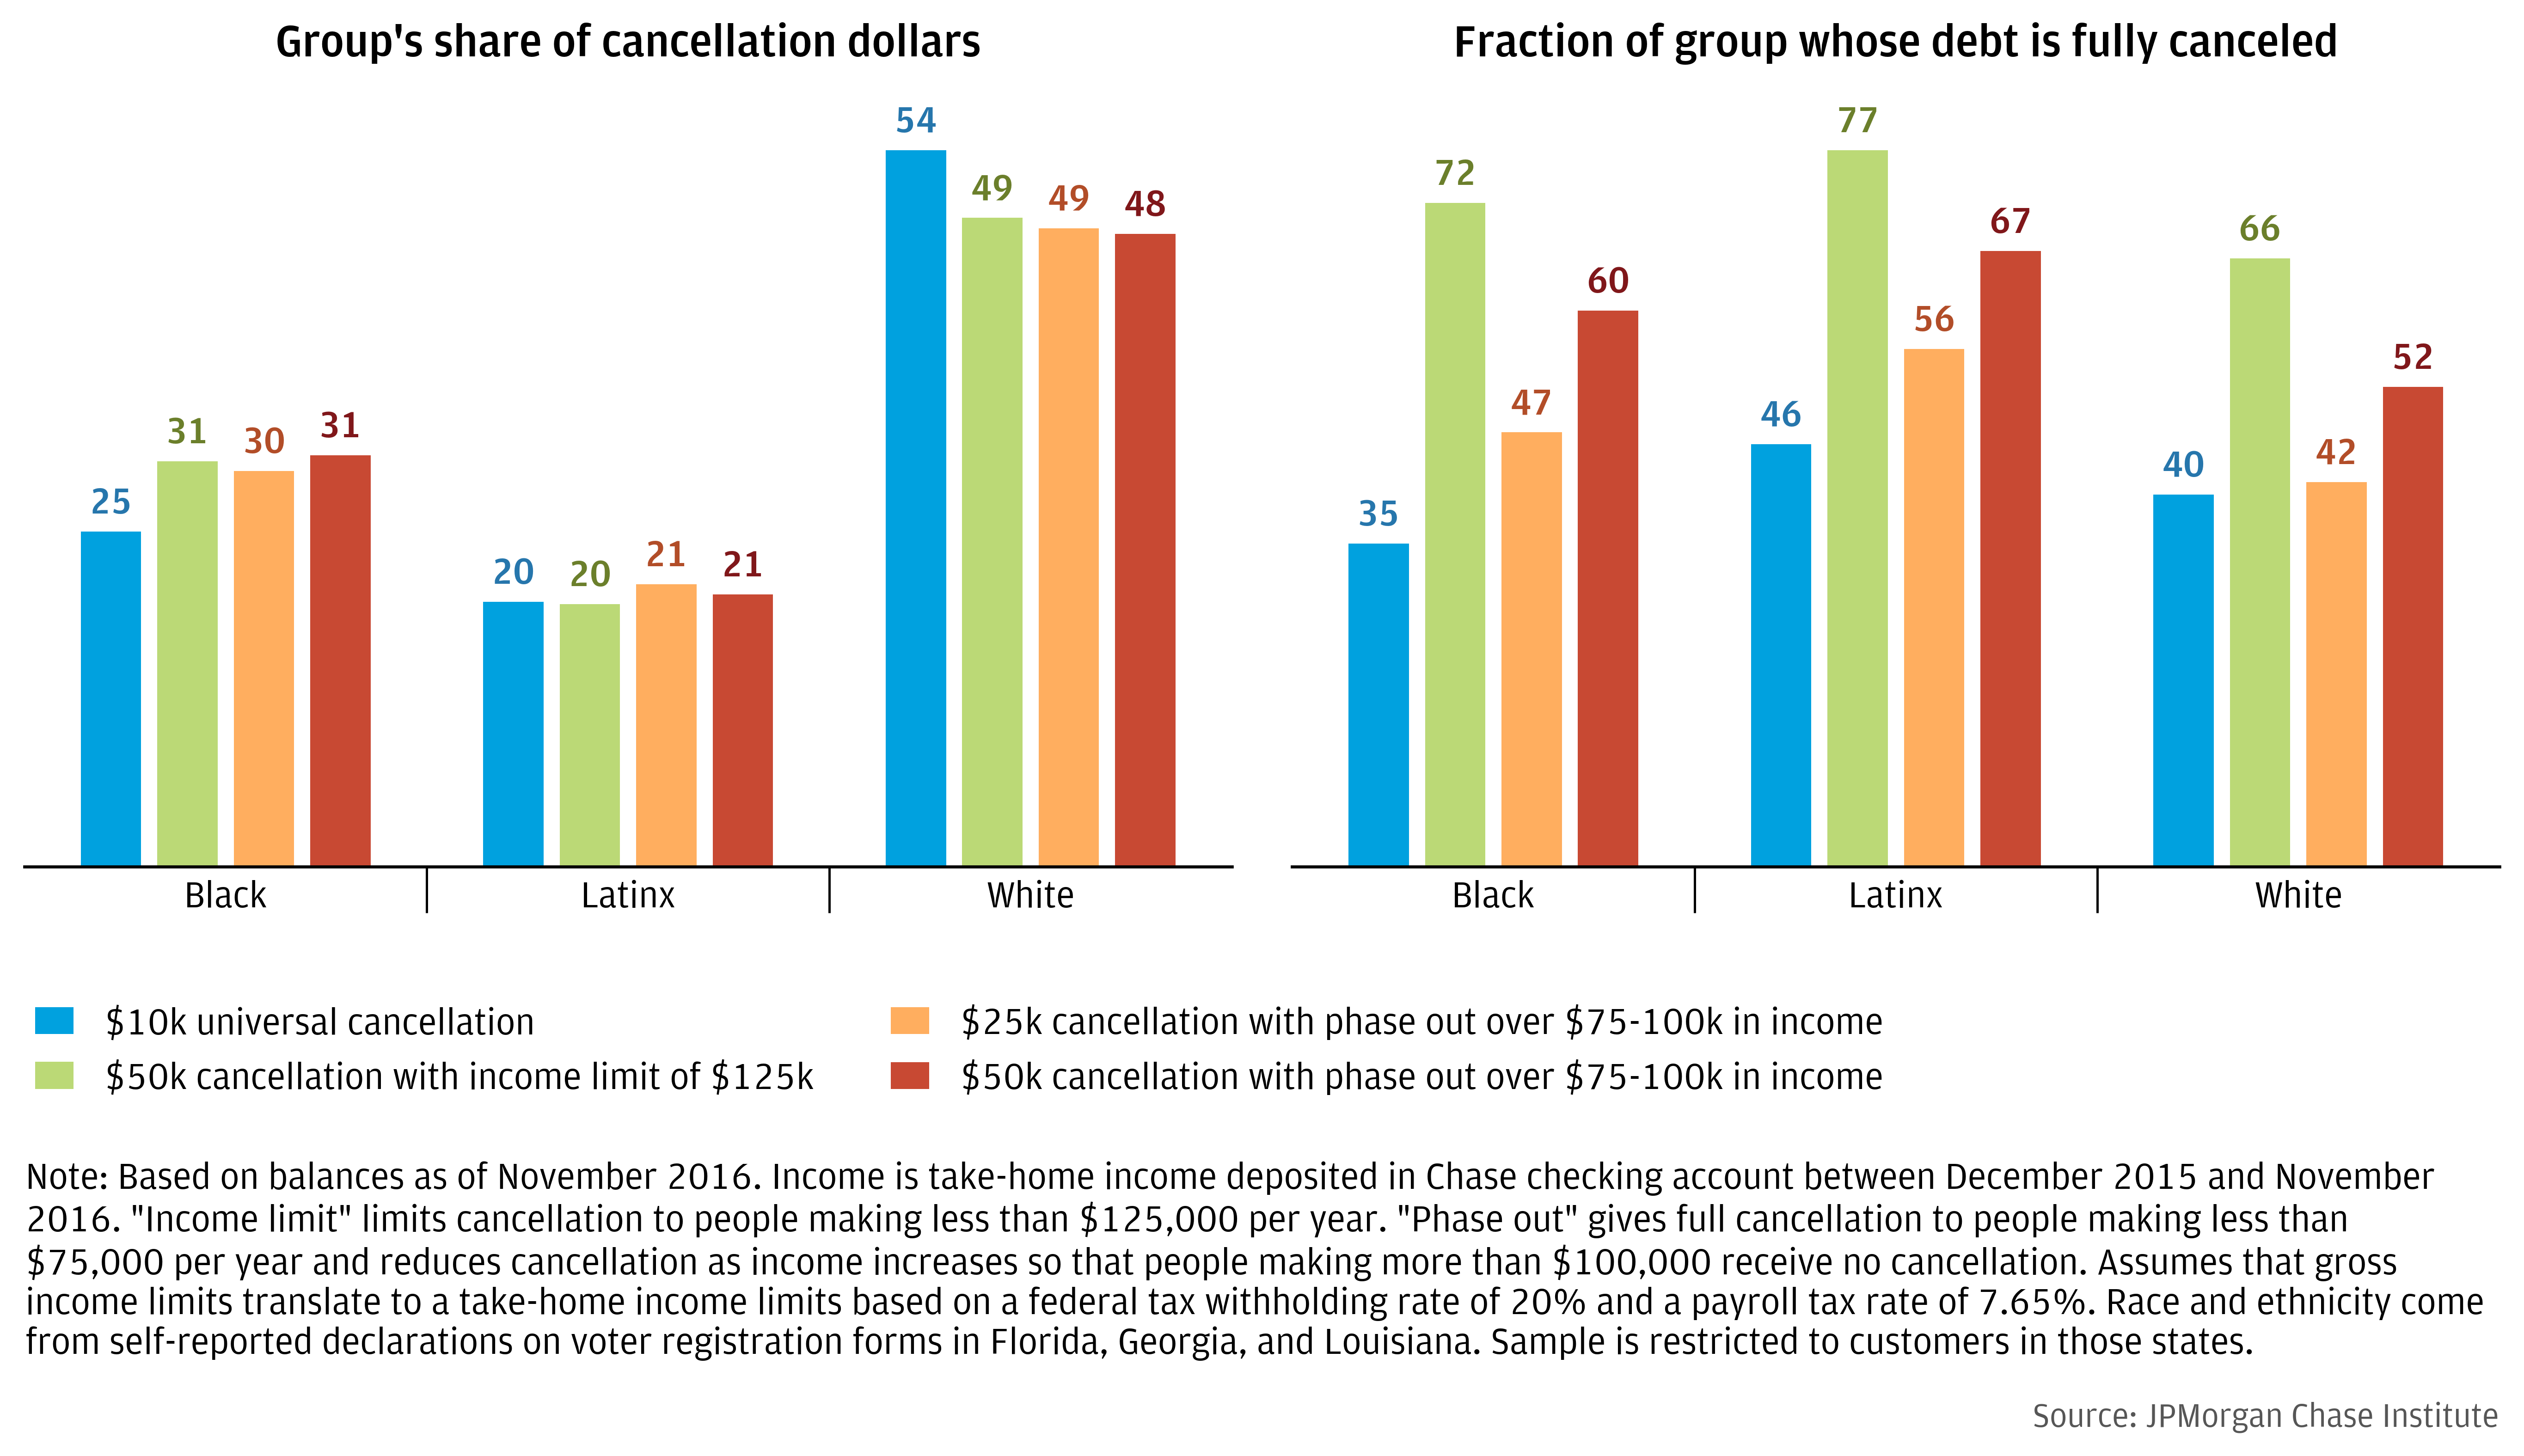 Distribution of cancellation benefits by race